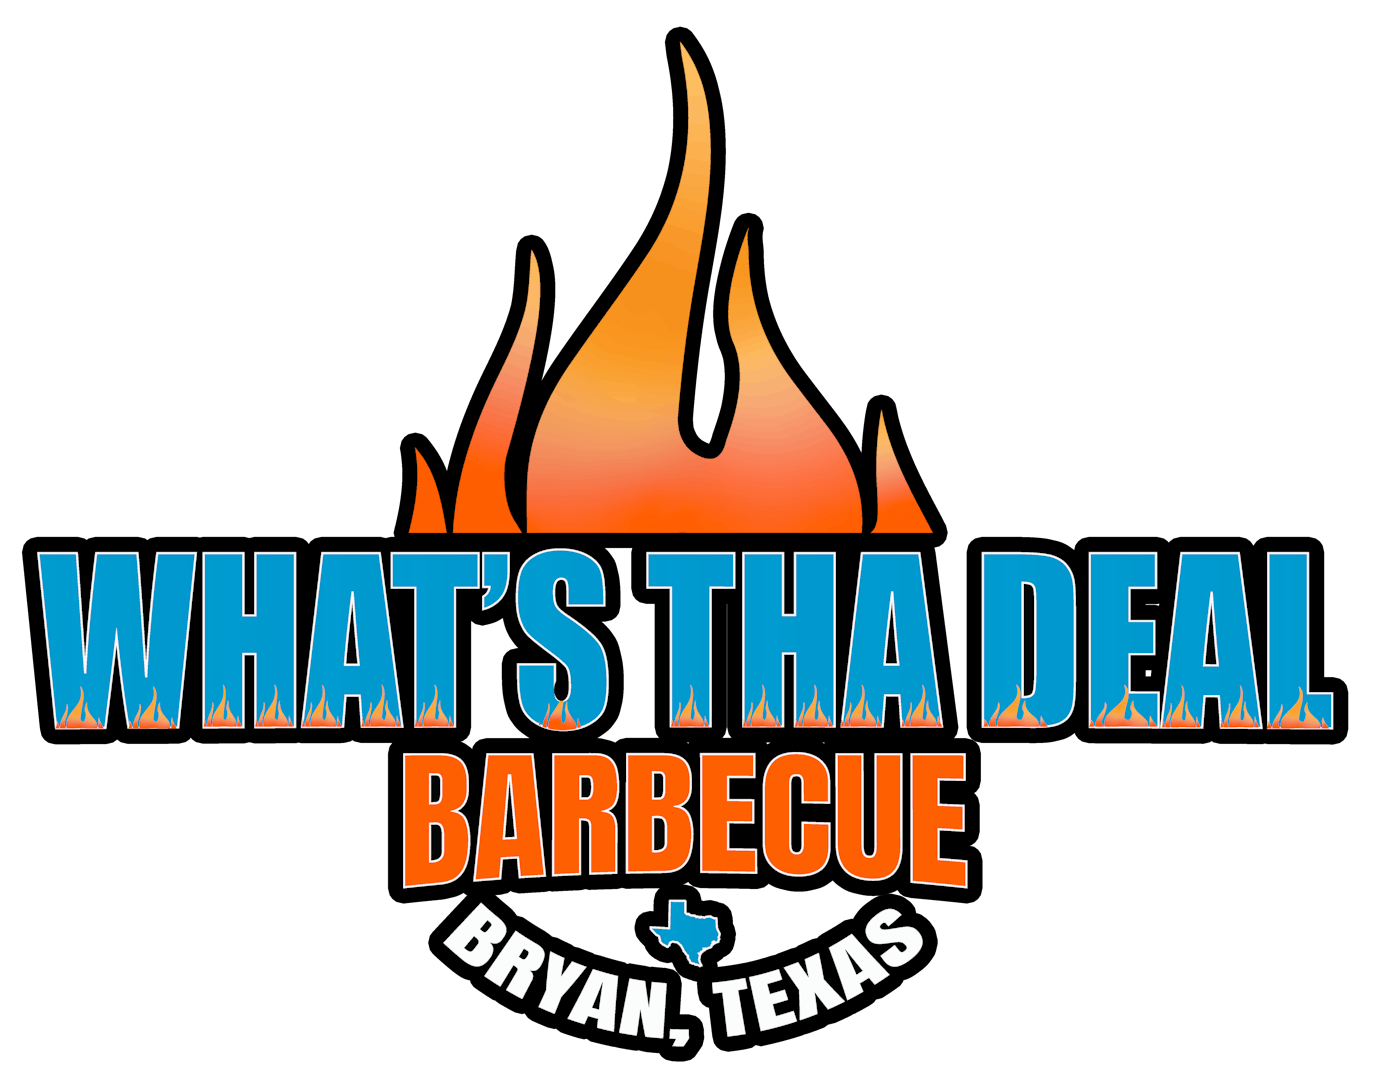 Whats The Deal Bbq?